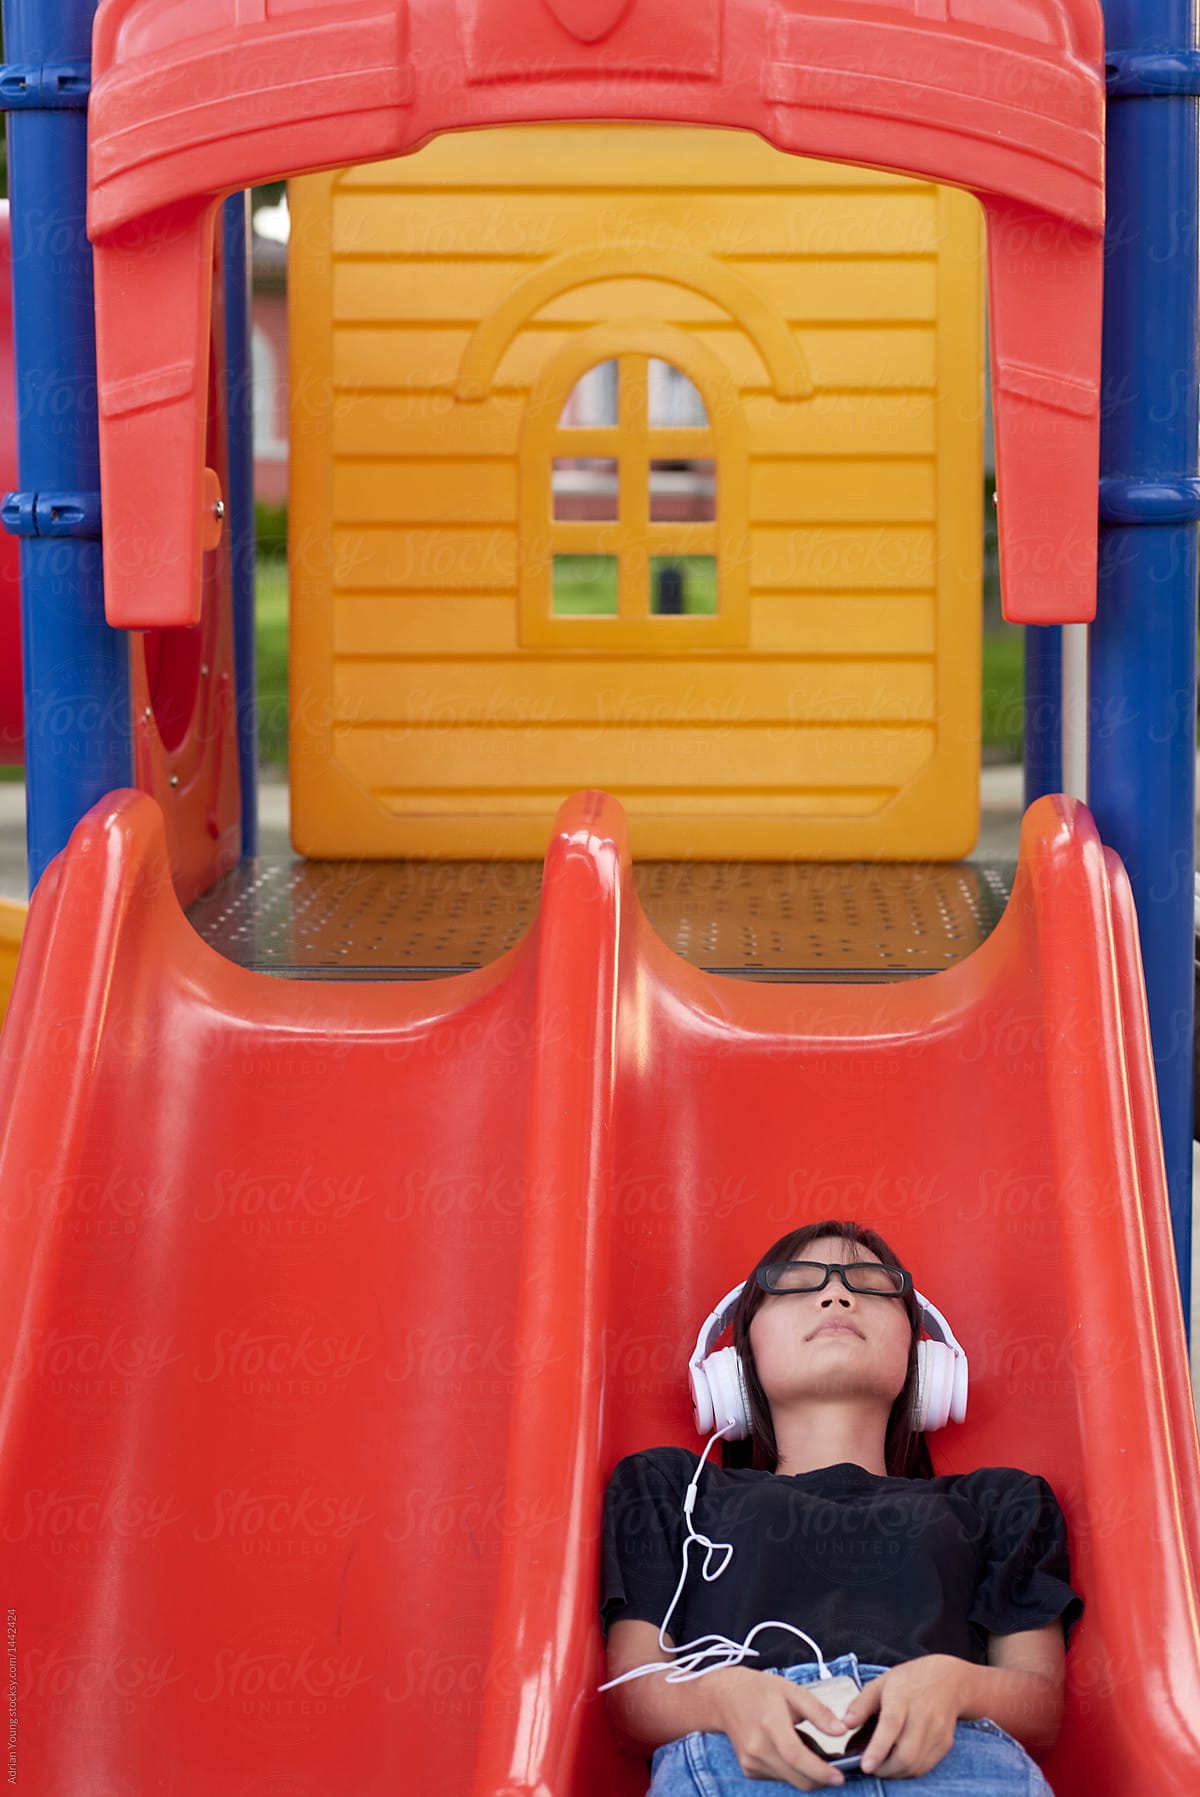 Teenager Listening To Music On A Kids Slide